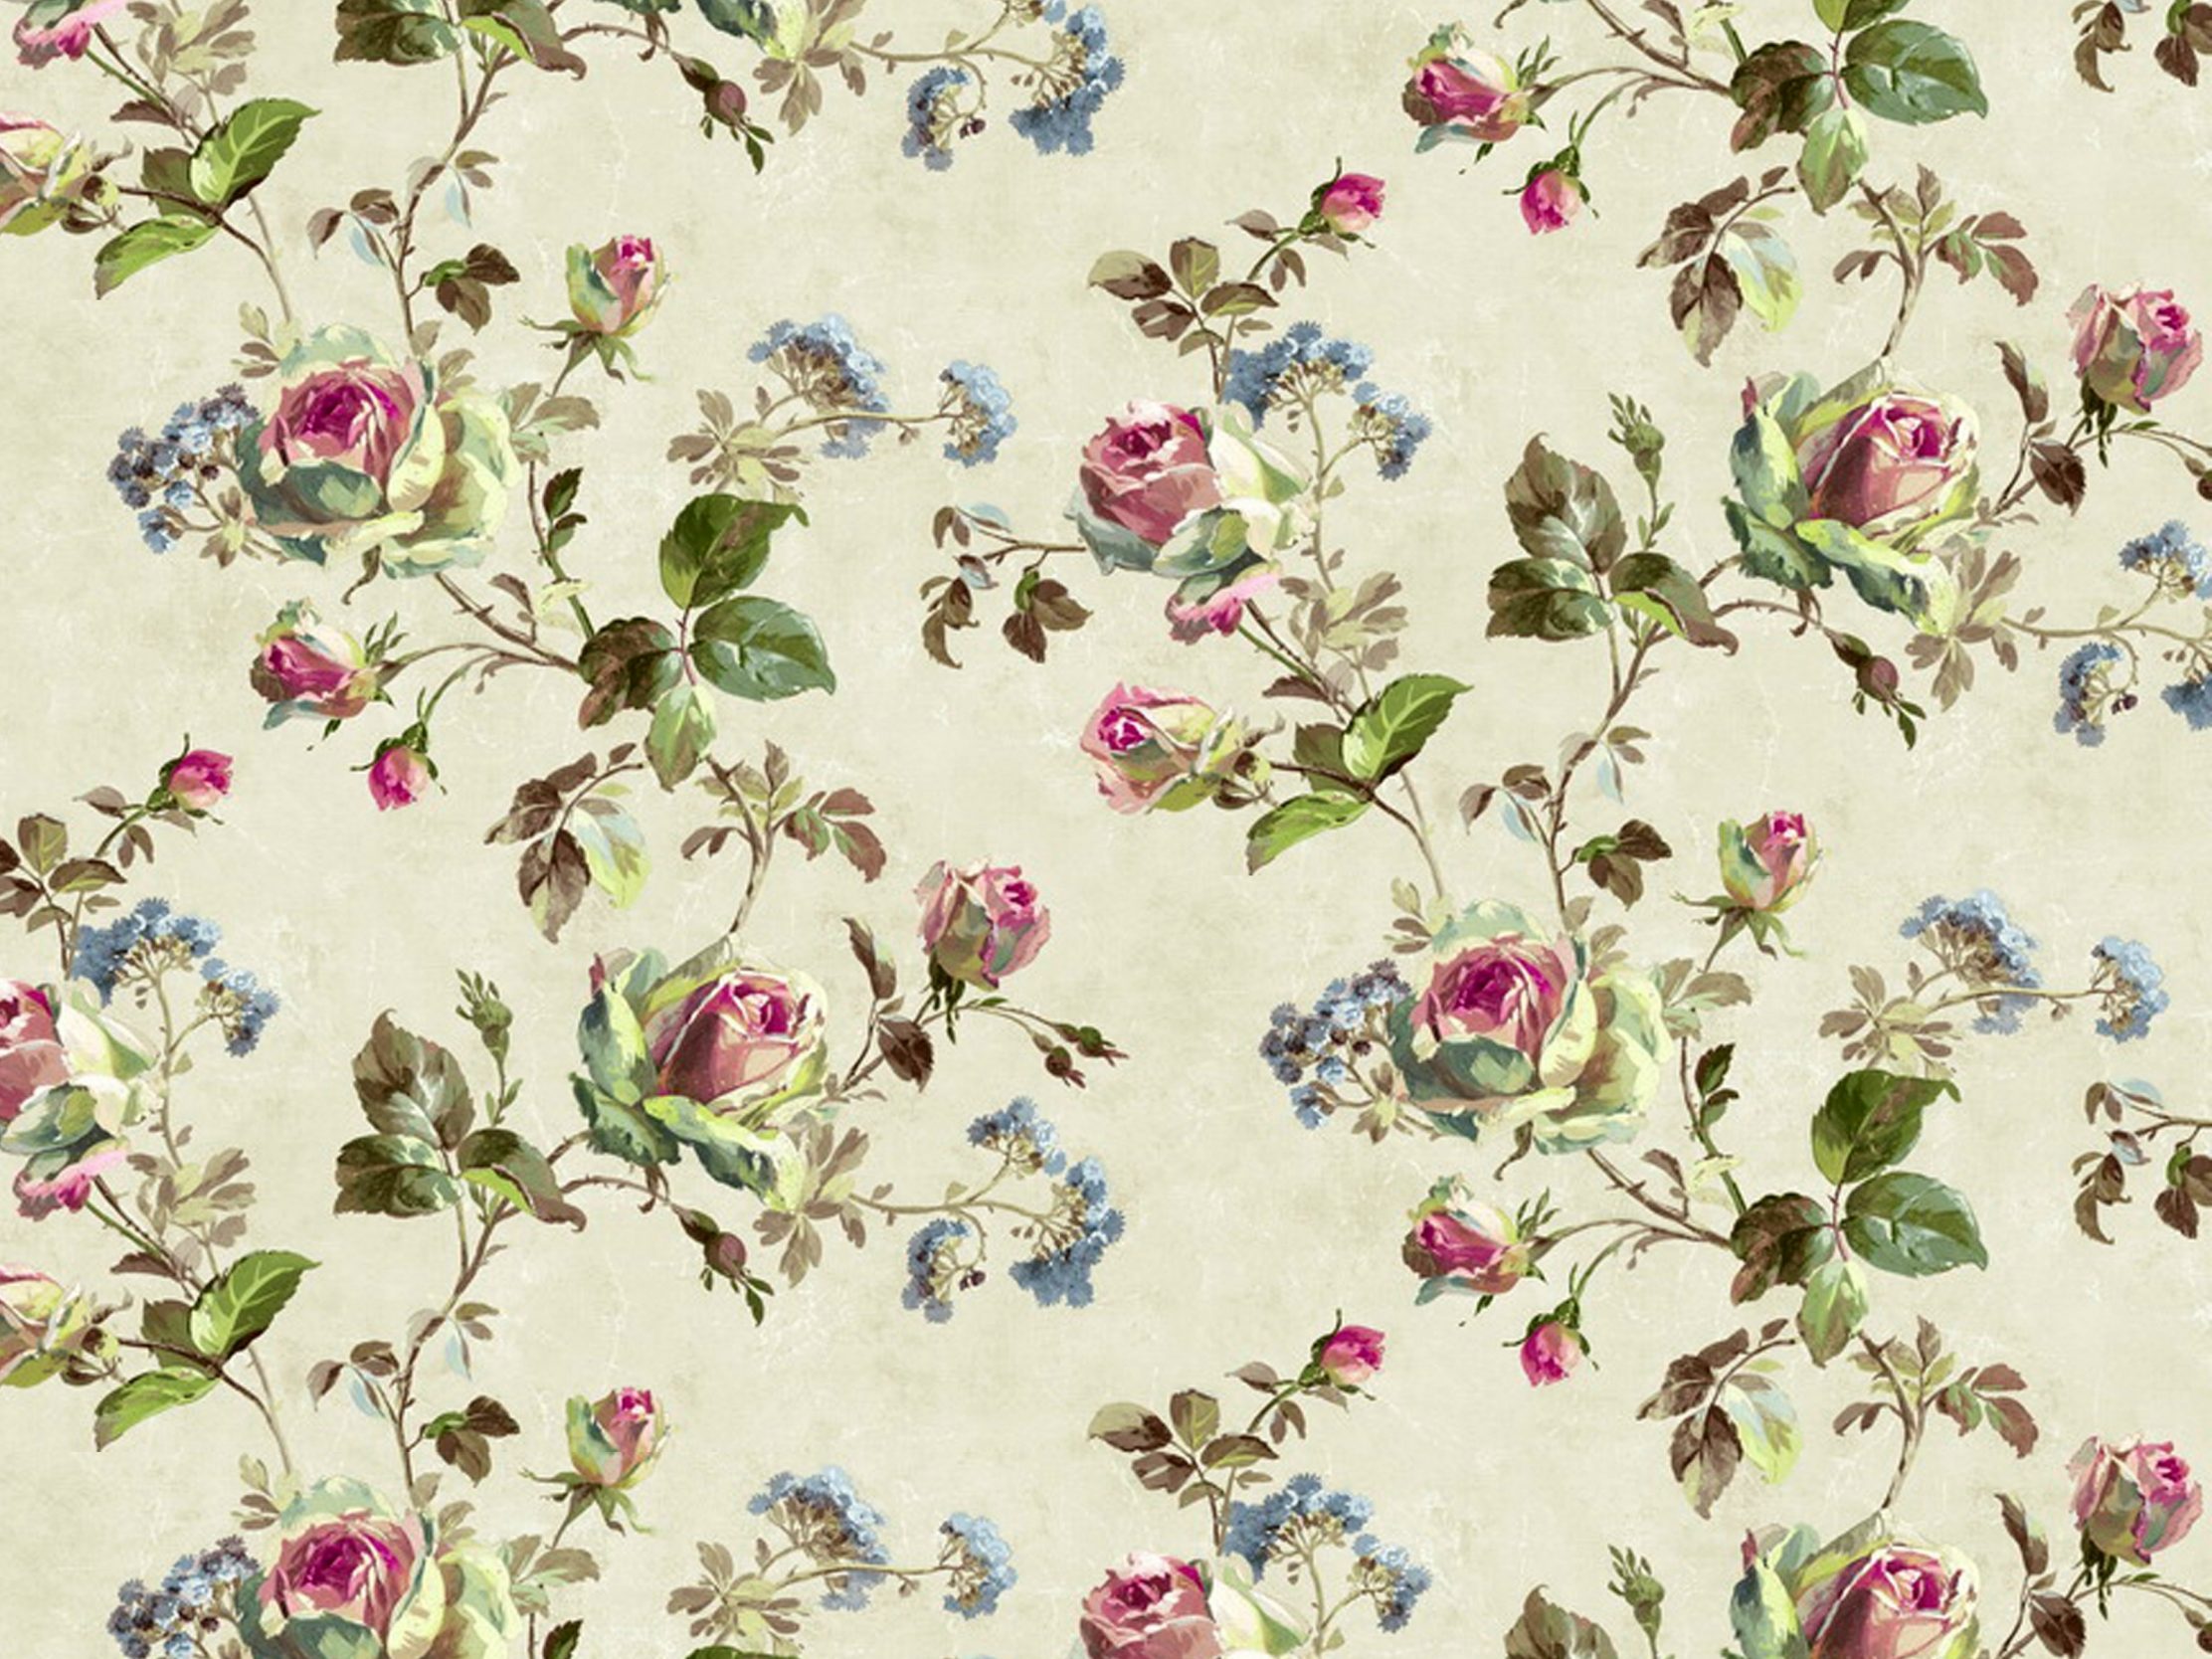 2224x1668 iPad Pro wallpapers Aesthetic Paper Colorful Flowers Paint iPad Wallpaper 2224x1668 pixels resolution